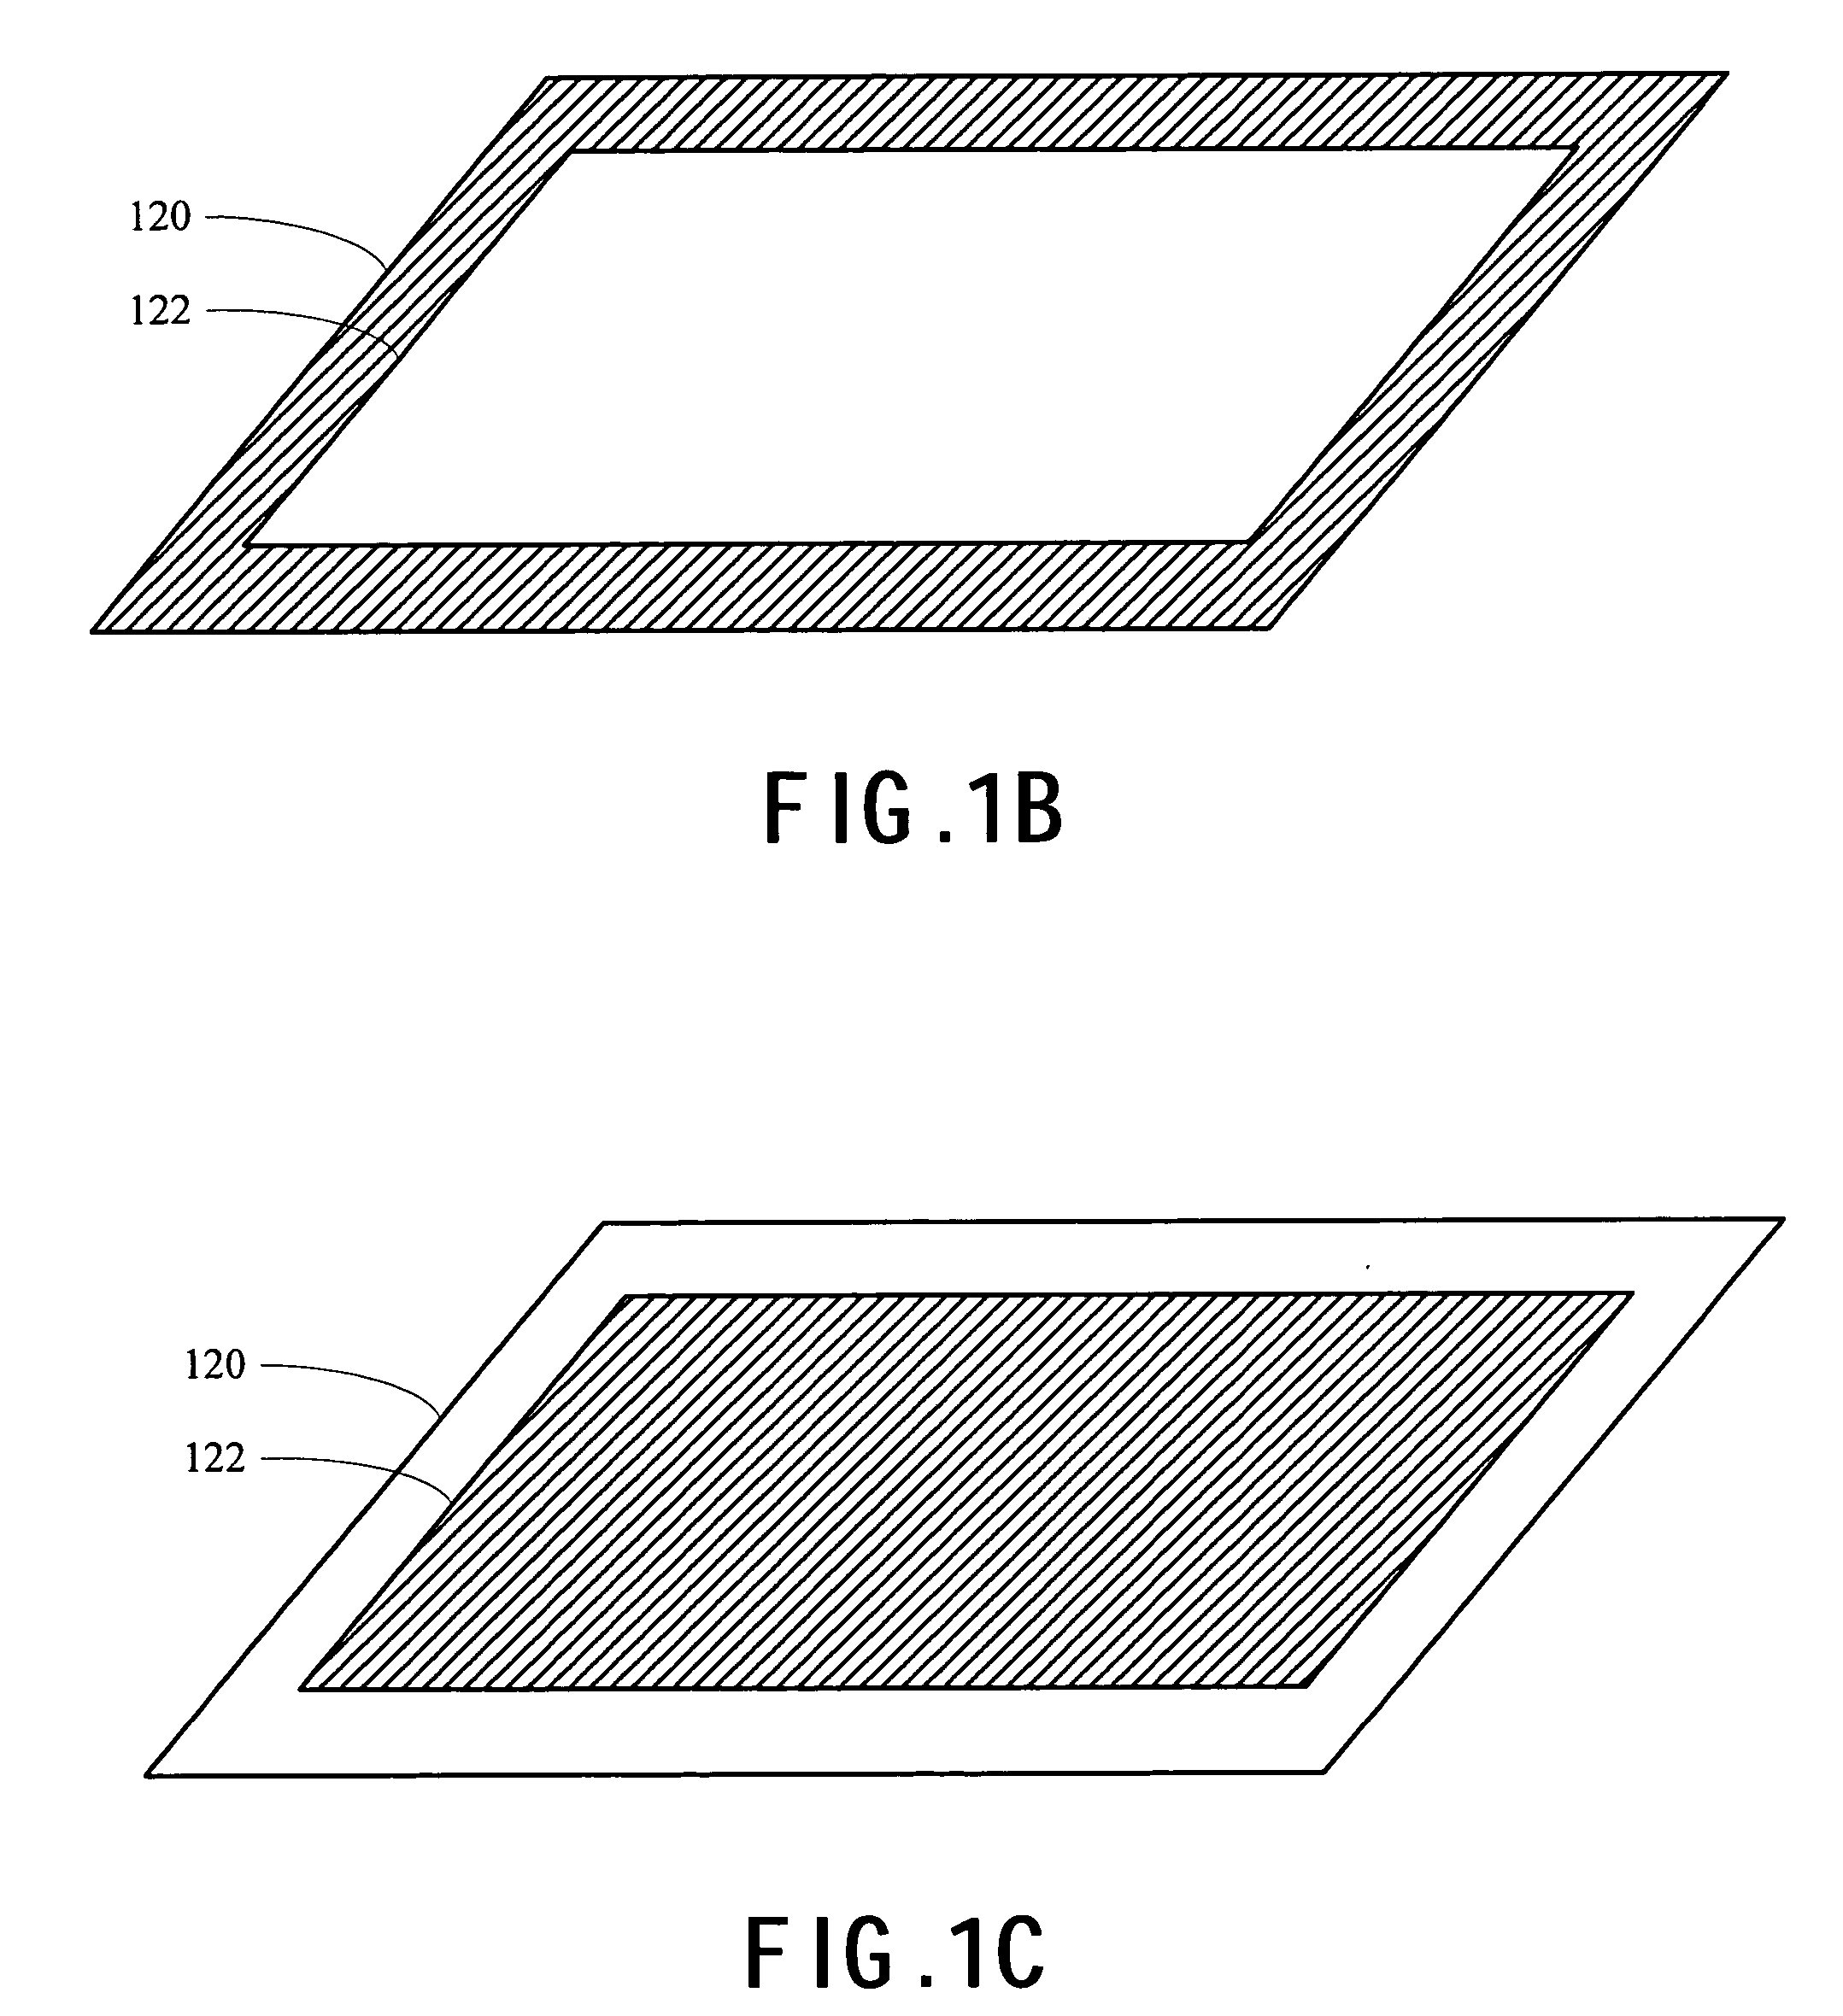 Cordless electromagnetic induction system and method for automatic wake up